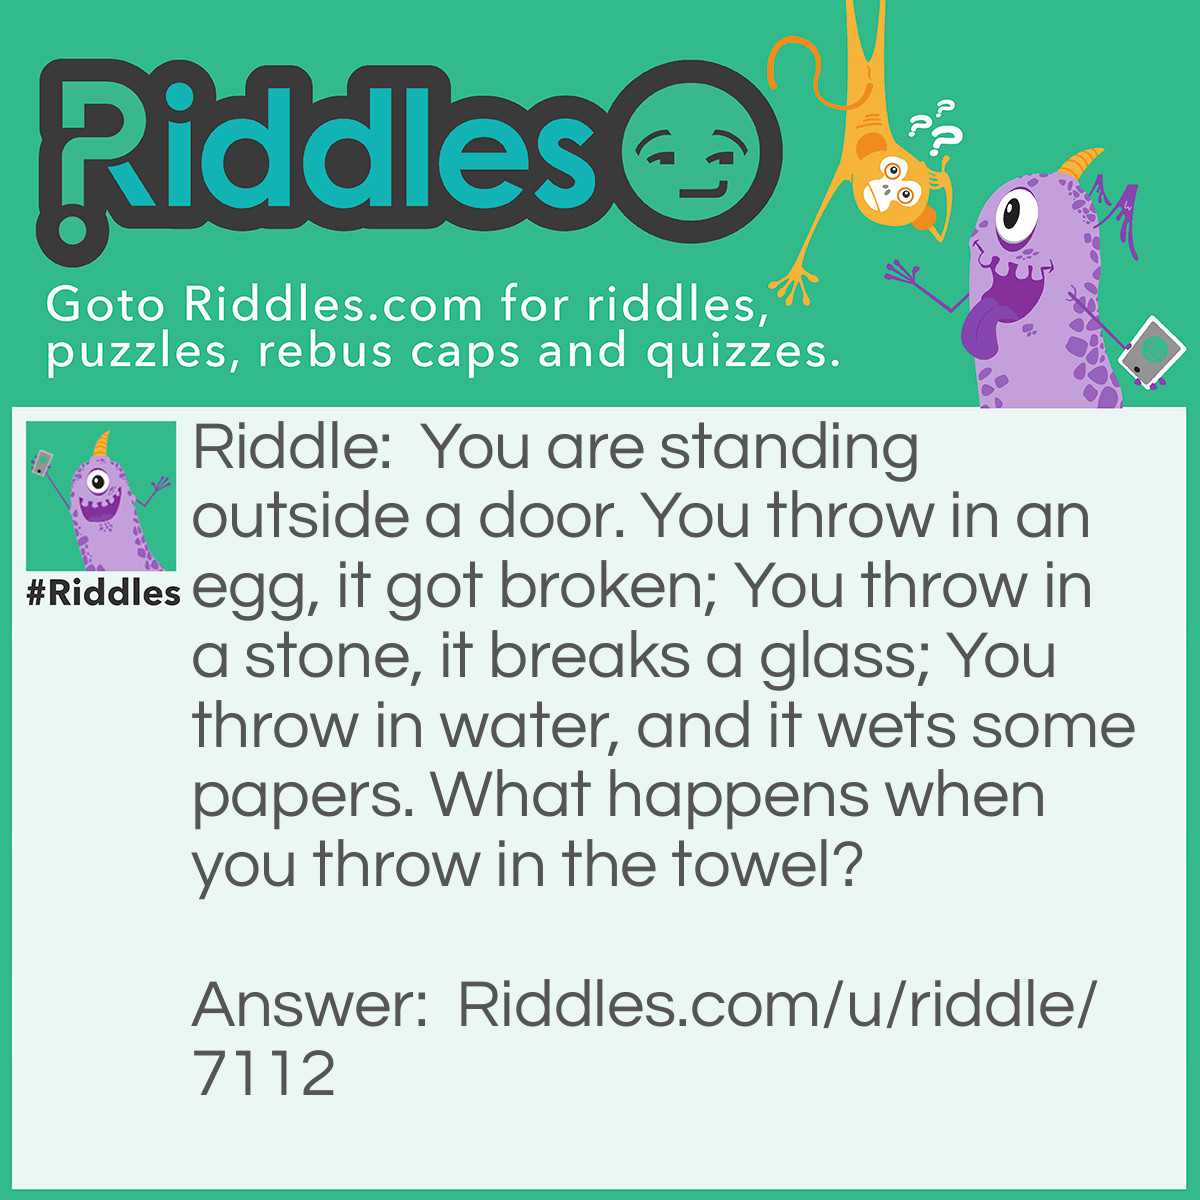 Riddle: You are standing outside a door. You throw in an egg, it got broken; You throw in a stone, it breaks a glass; You throw in water, and it wets some papers. What happens when you throw in the towel? Answer: You give up (probably because you are tired).